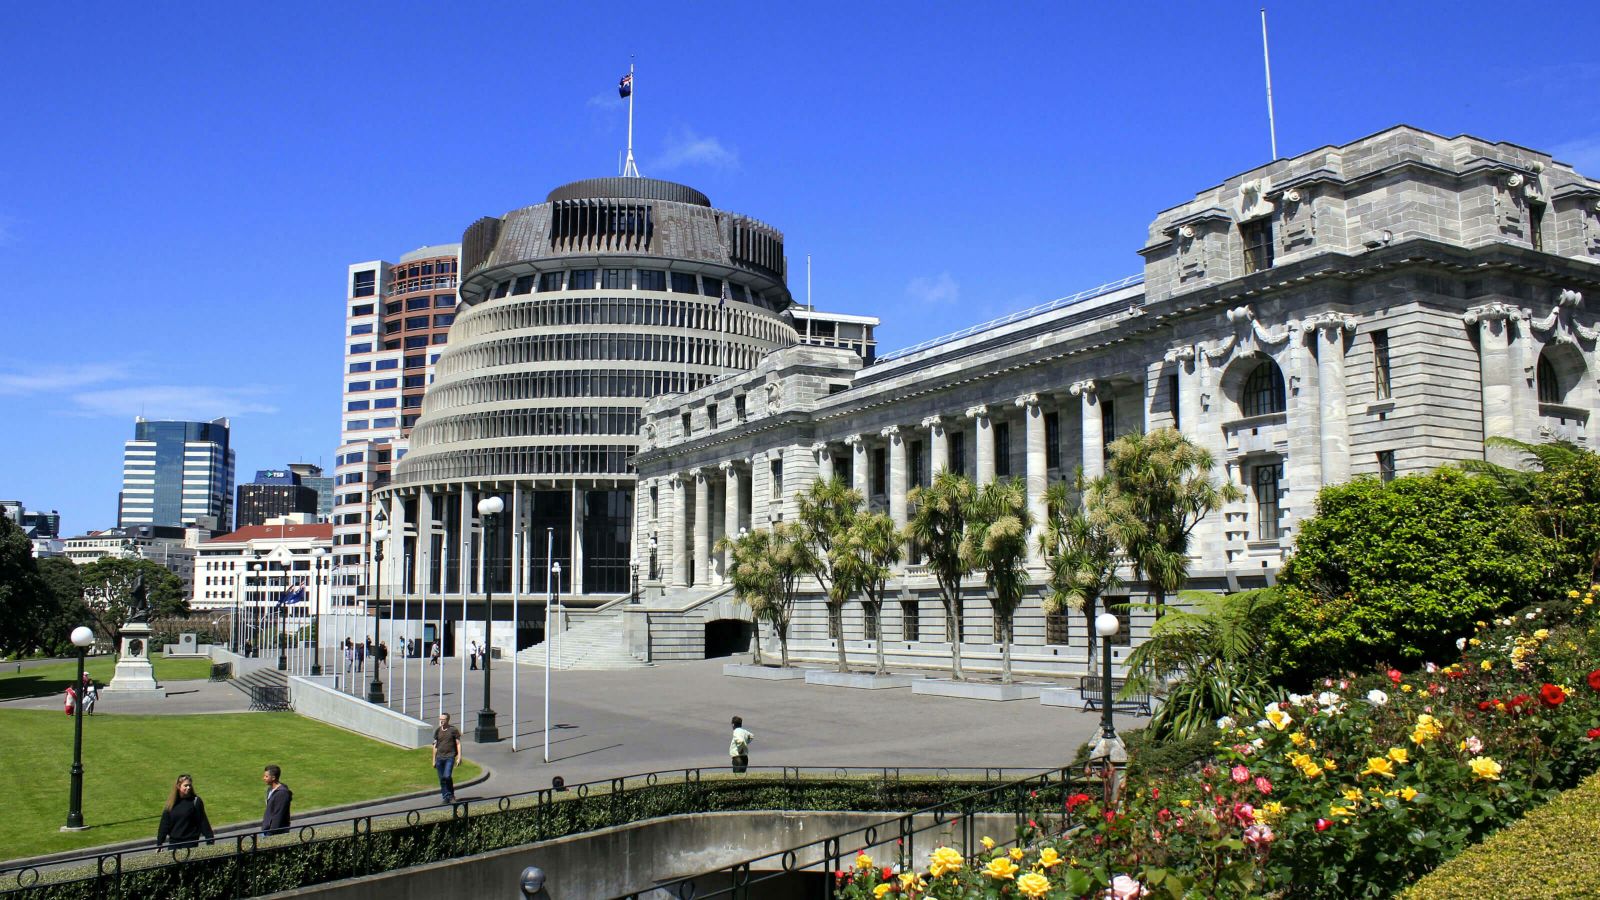 The front lawn of New Zealand Parliament including the Beehive and Parliament House.